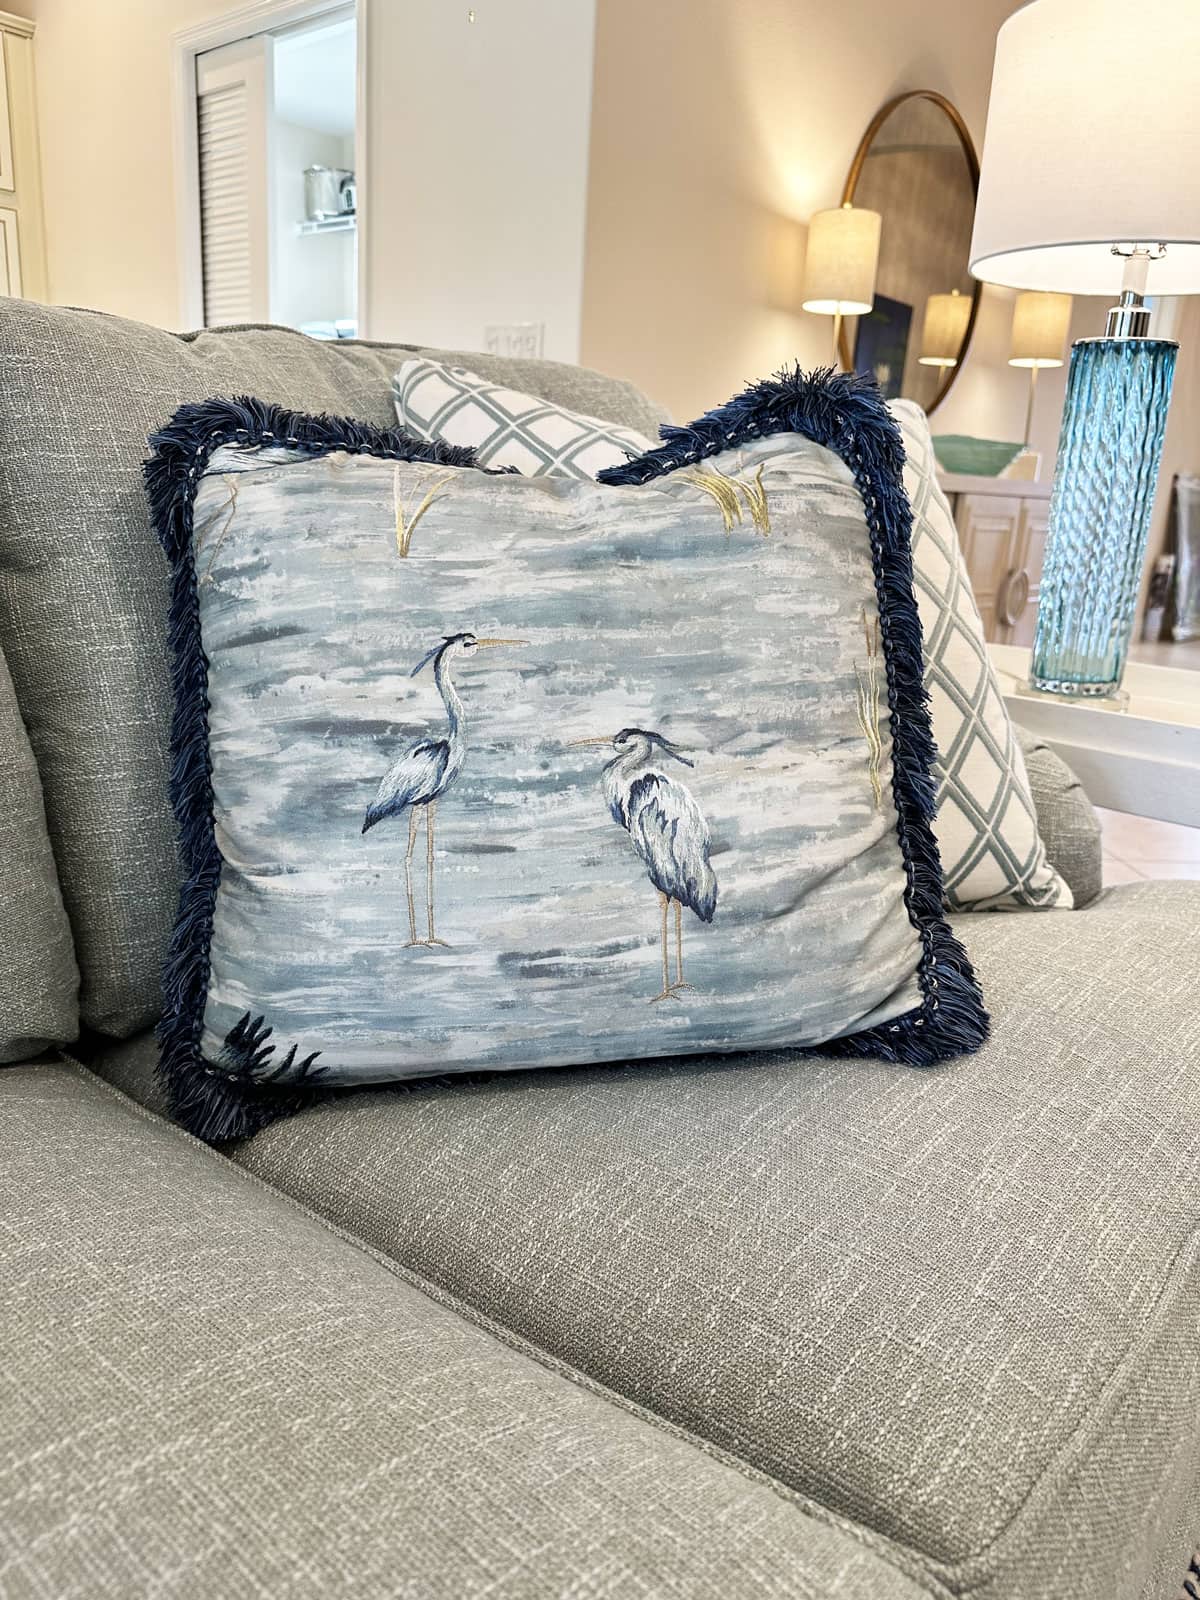 Babette's Furniture & Home in Leesburg - Coastal Inspired by Aylin Bucci